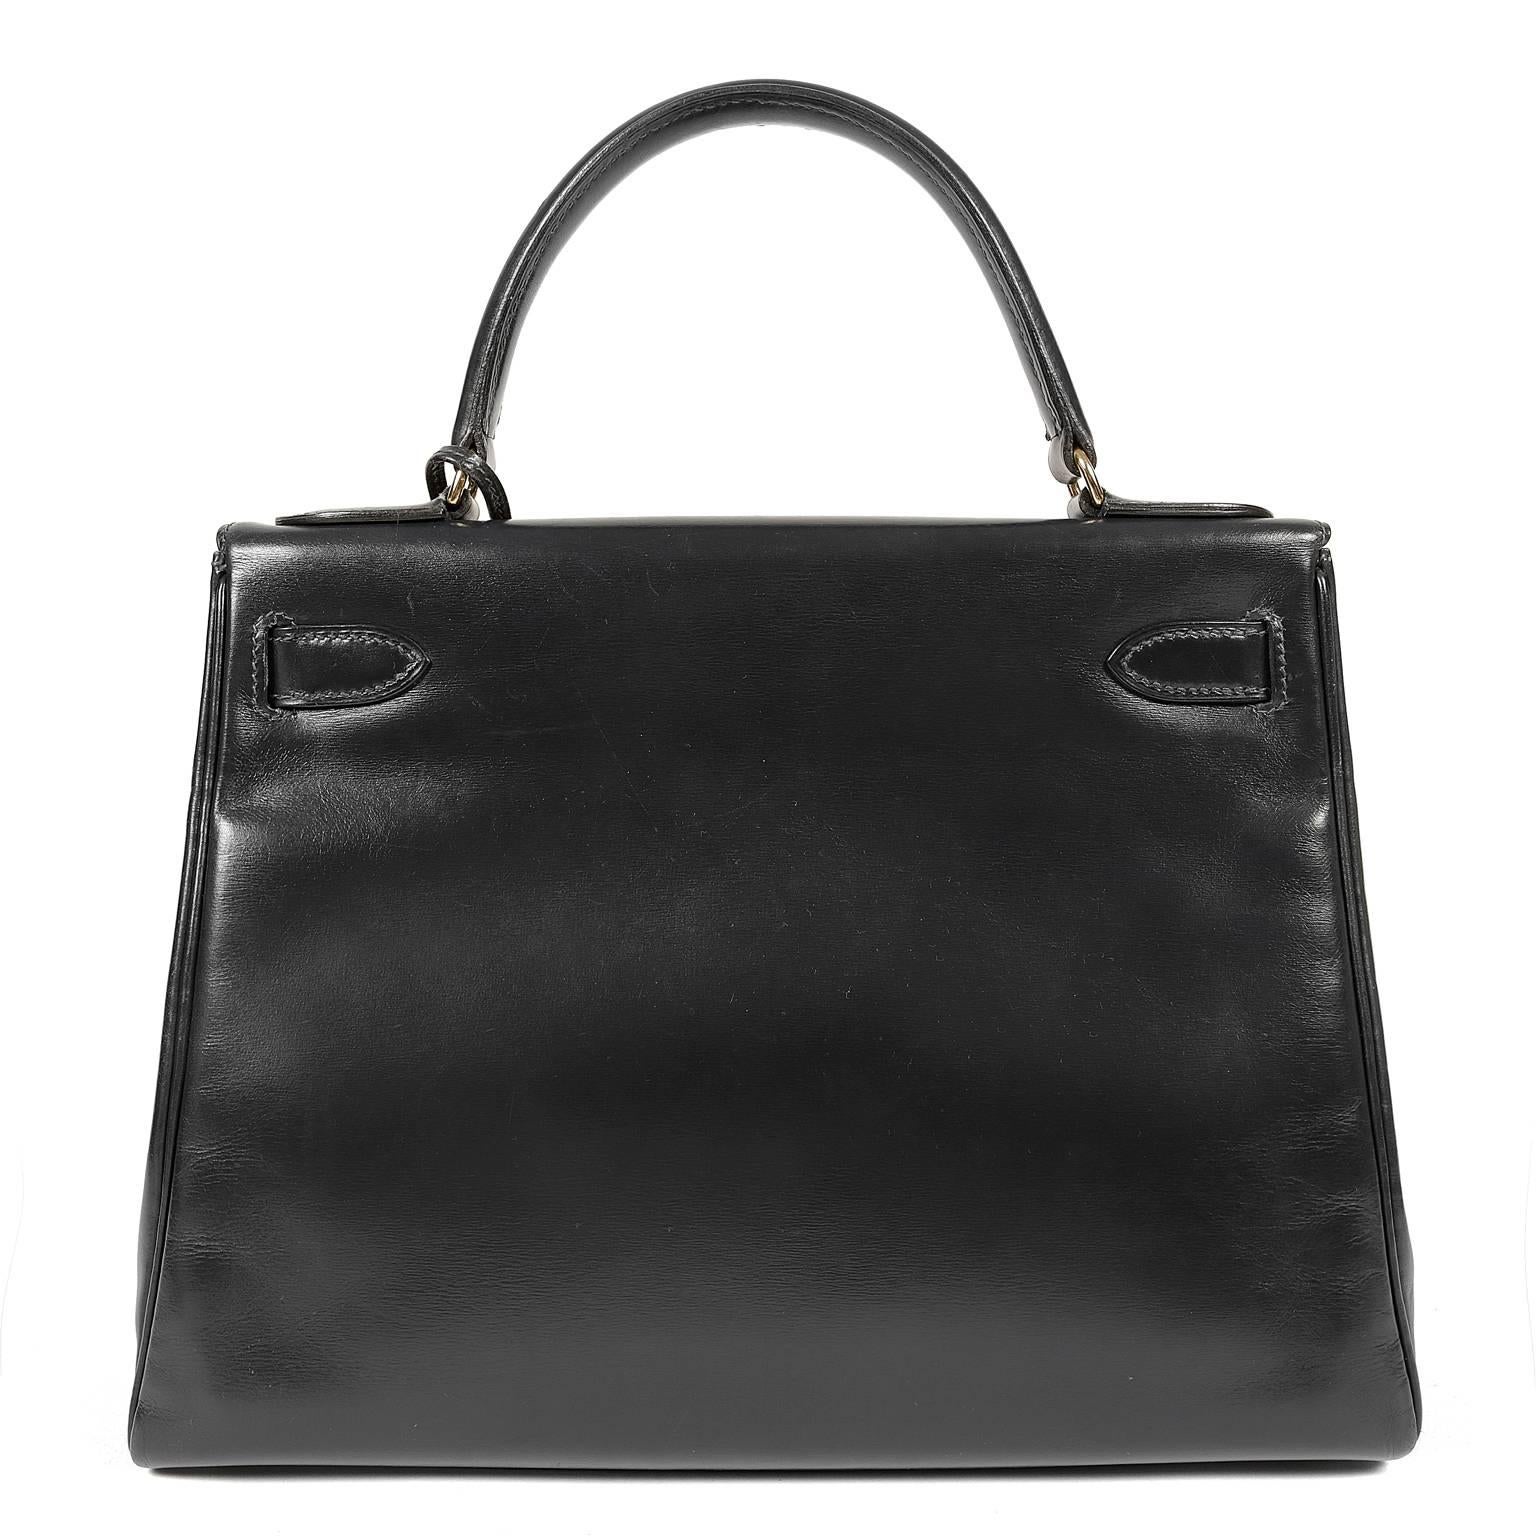 Hermès Black Box Calf 28 Kelly- Excellent condition
 Hermès bags are considered the ultimate luxury item worldwide.  Each piece is handcrafted with waitlists that can exceed a year or more.  The ladylike Kelly is classic and refined, especially